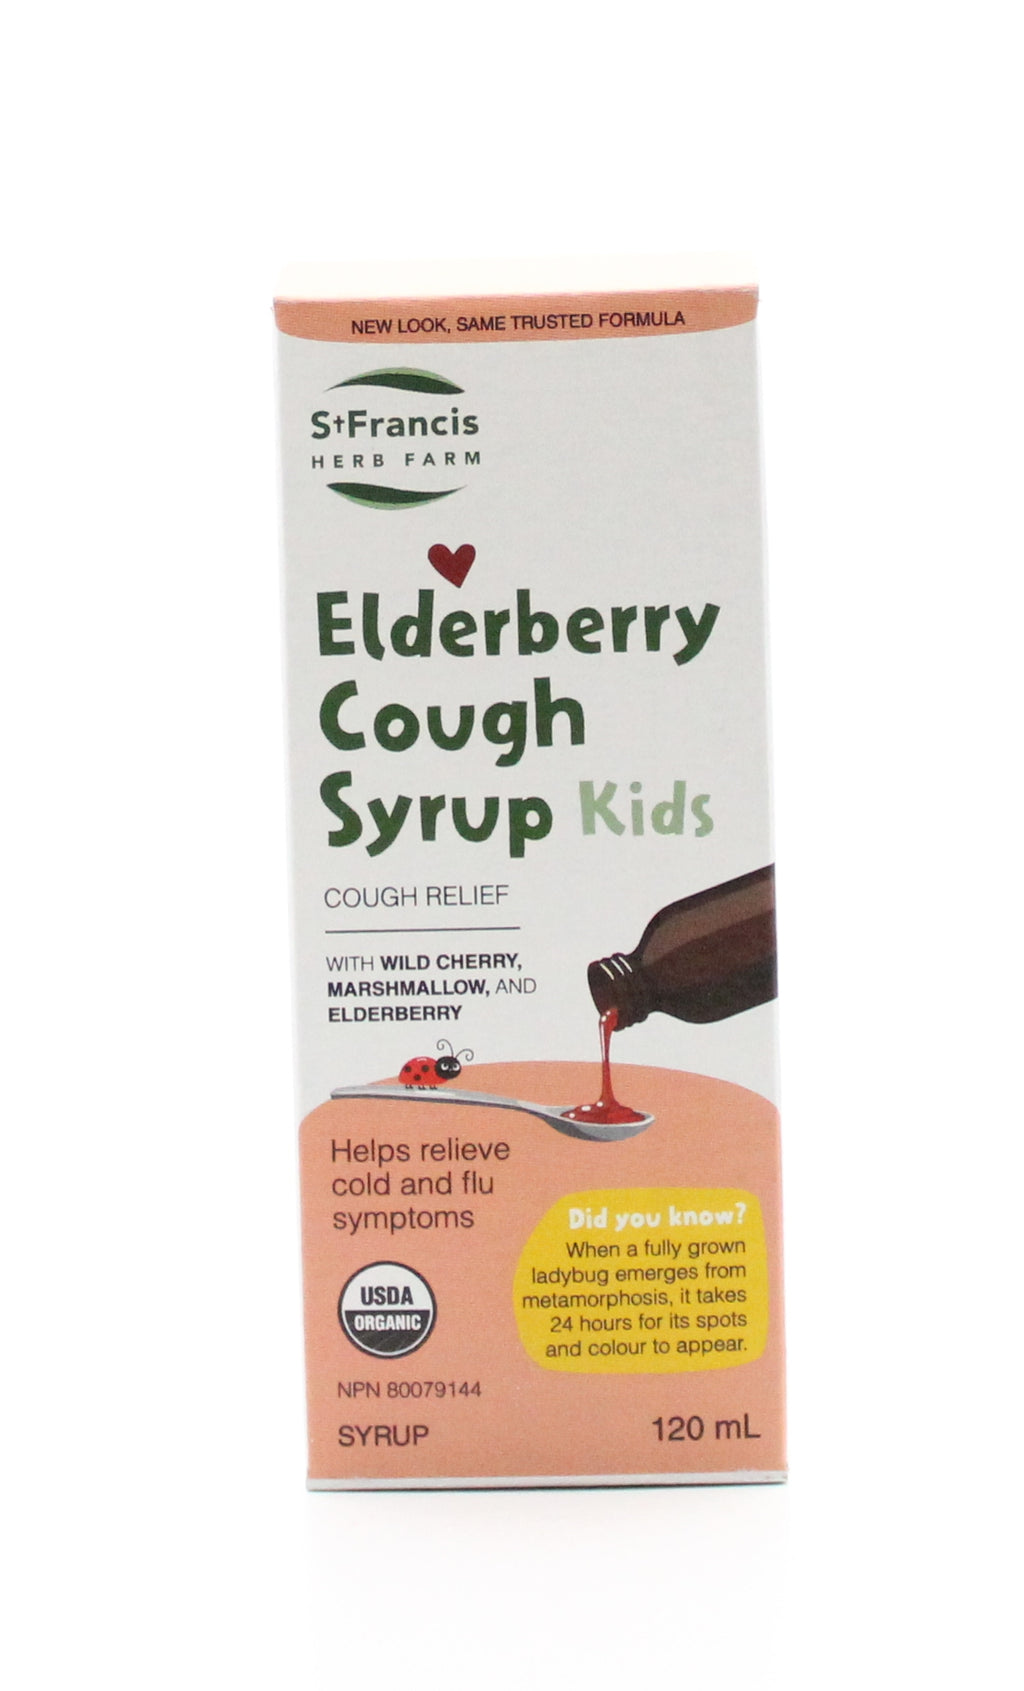 Elderberry cough syrup natural remedy